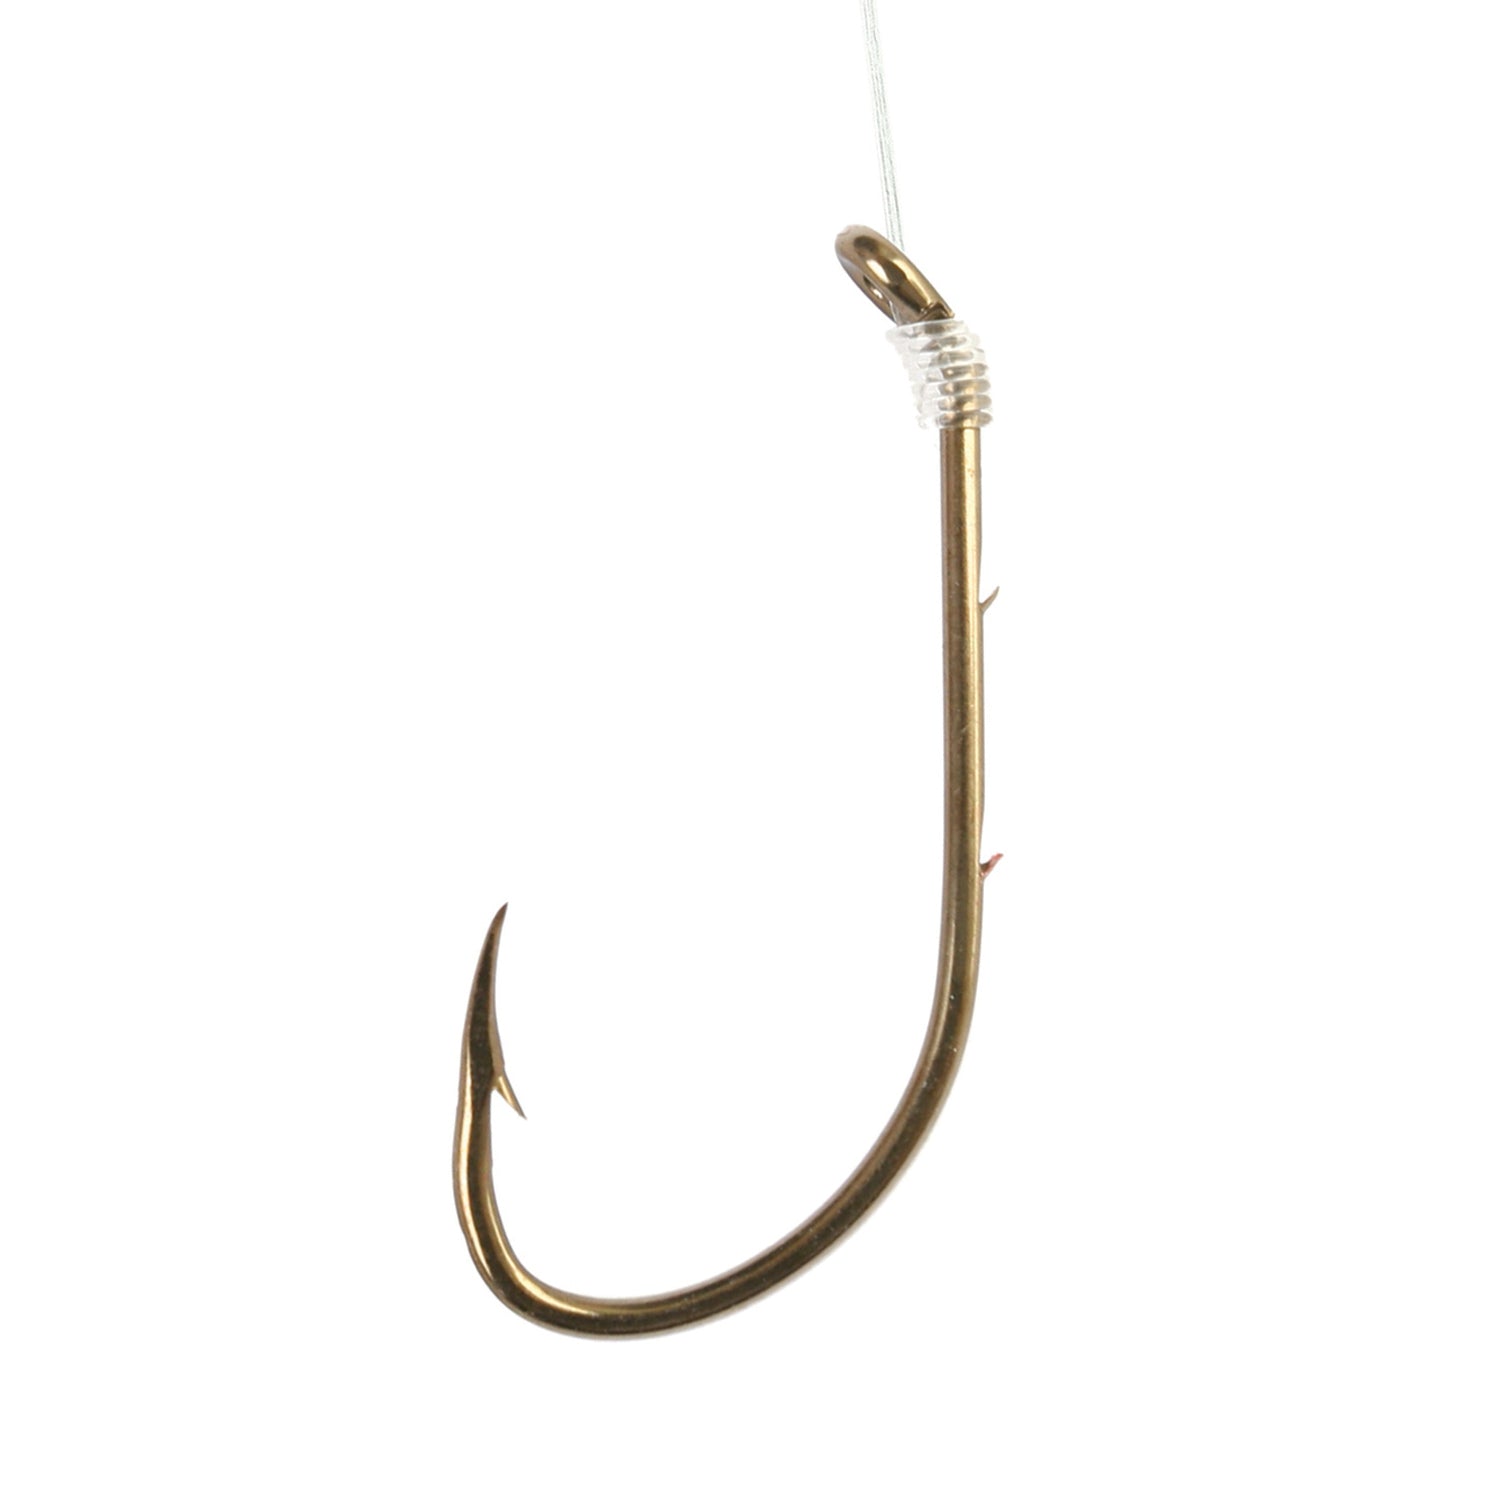 Eagle Claw O'Shaughnessy Non-Offset Fishing Hook, Sea Guard 